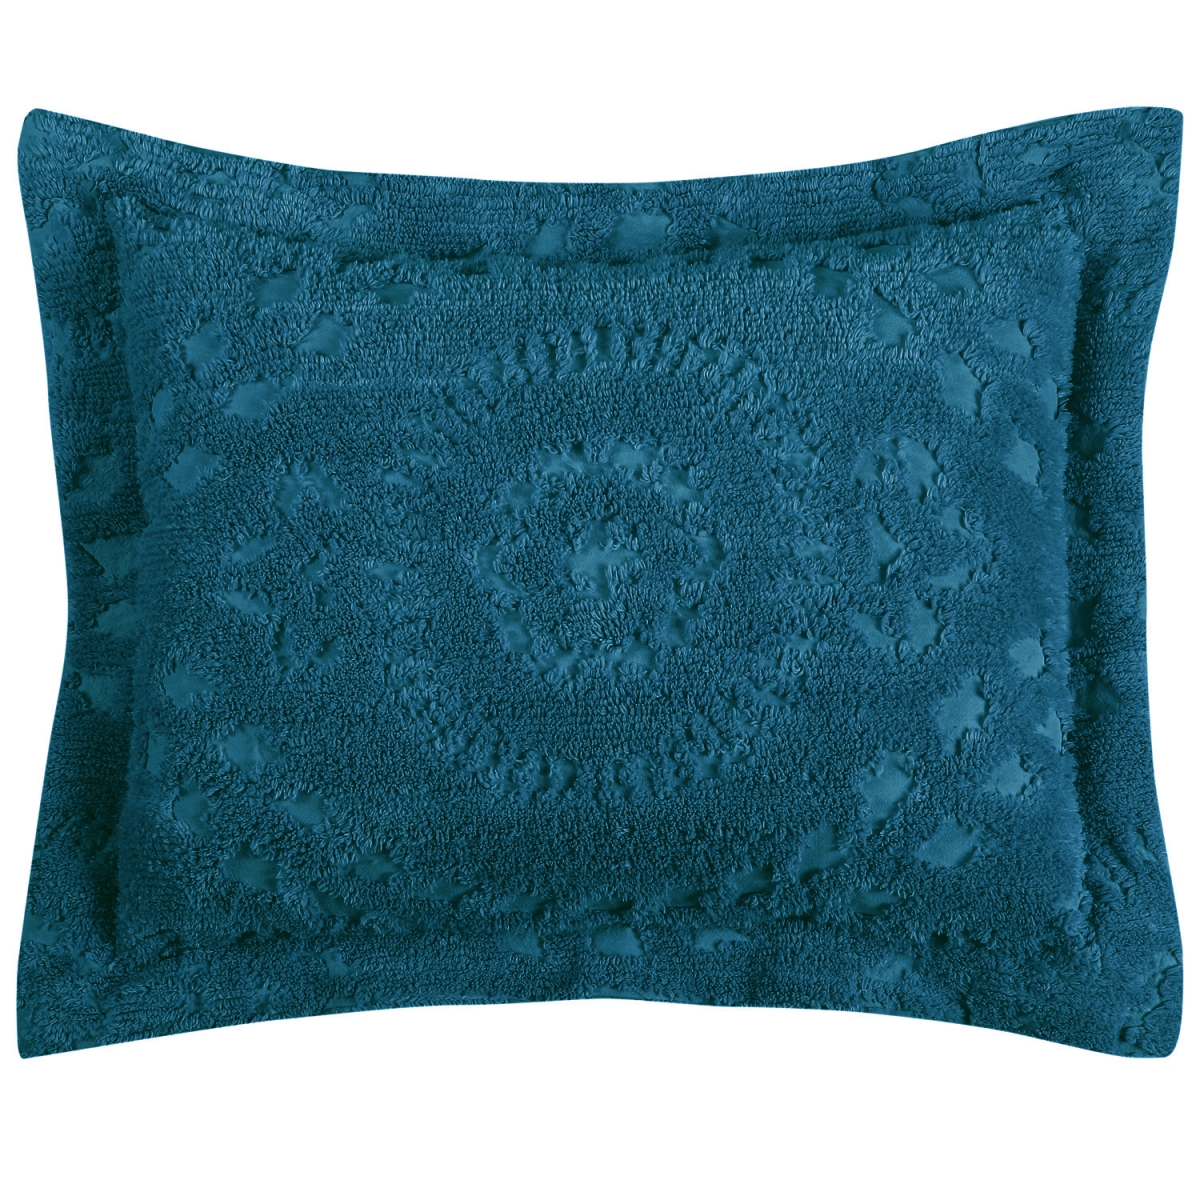 Picture of Better Trends SHR2127TL Rio Cotton Pillow Sham, Teal - Standard Size